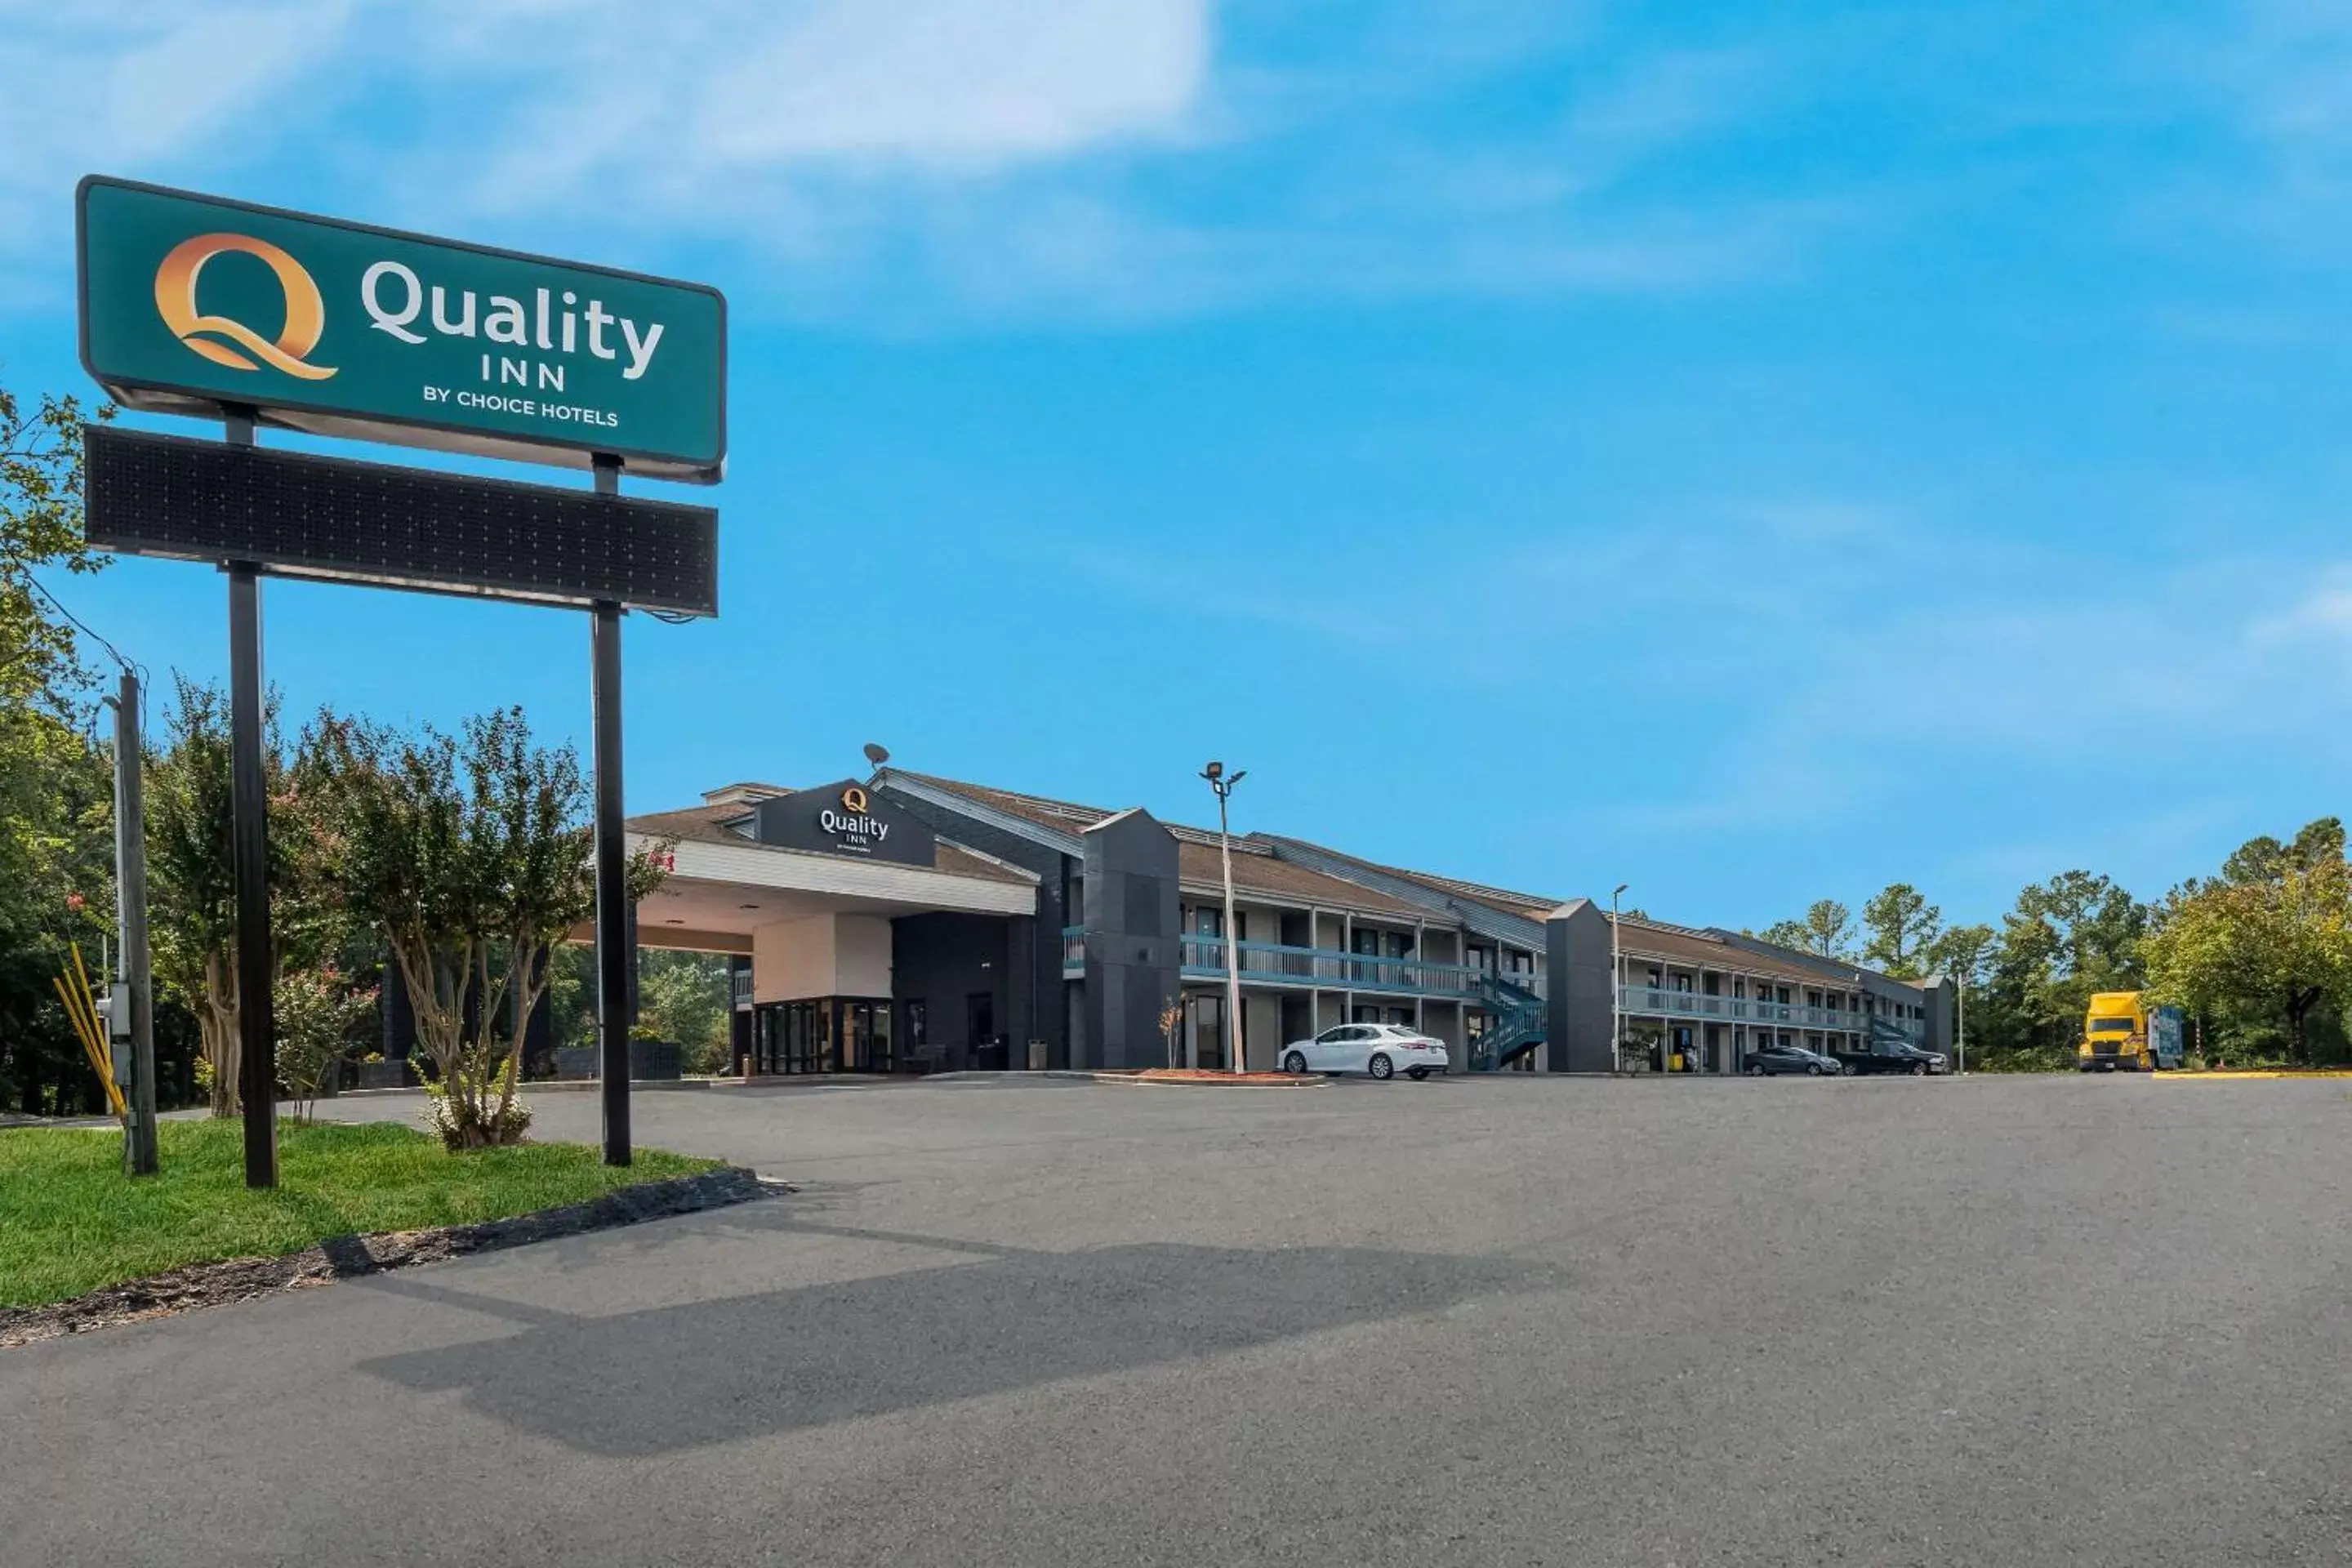 Property Building in Quality Inn Fort Jackson